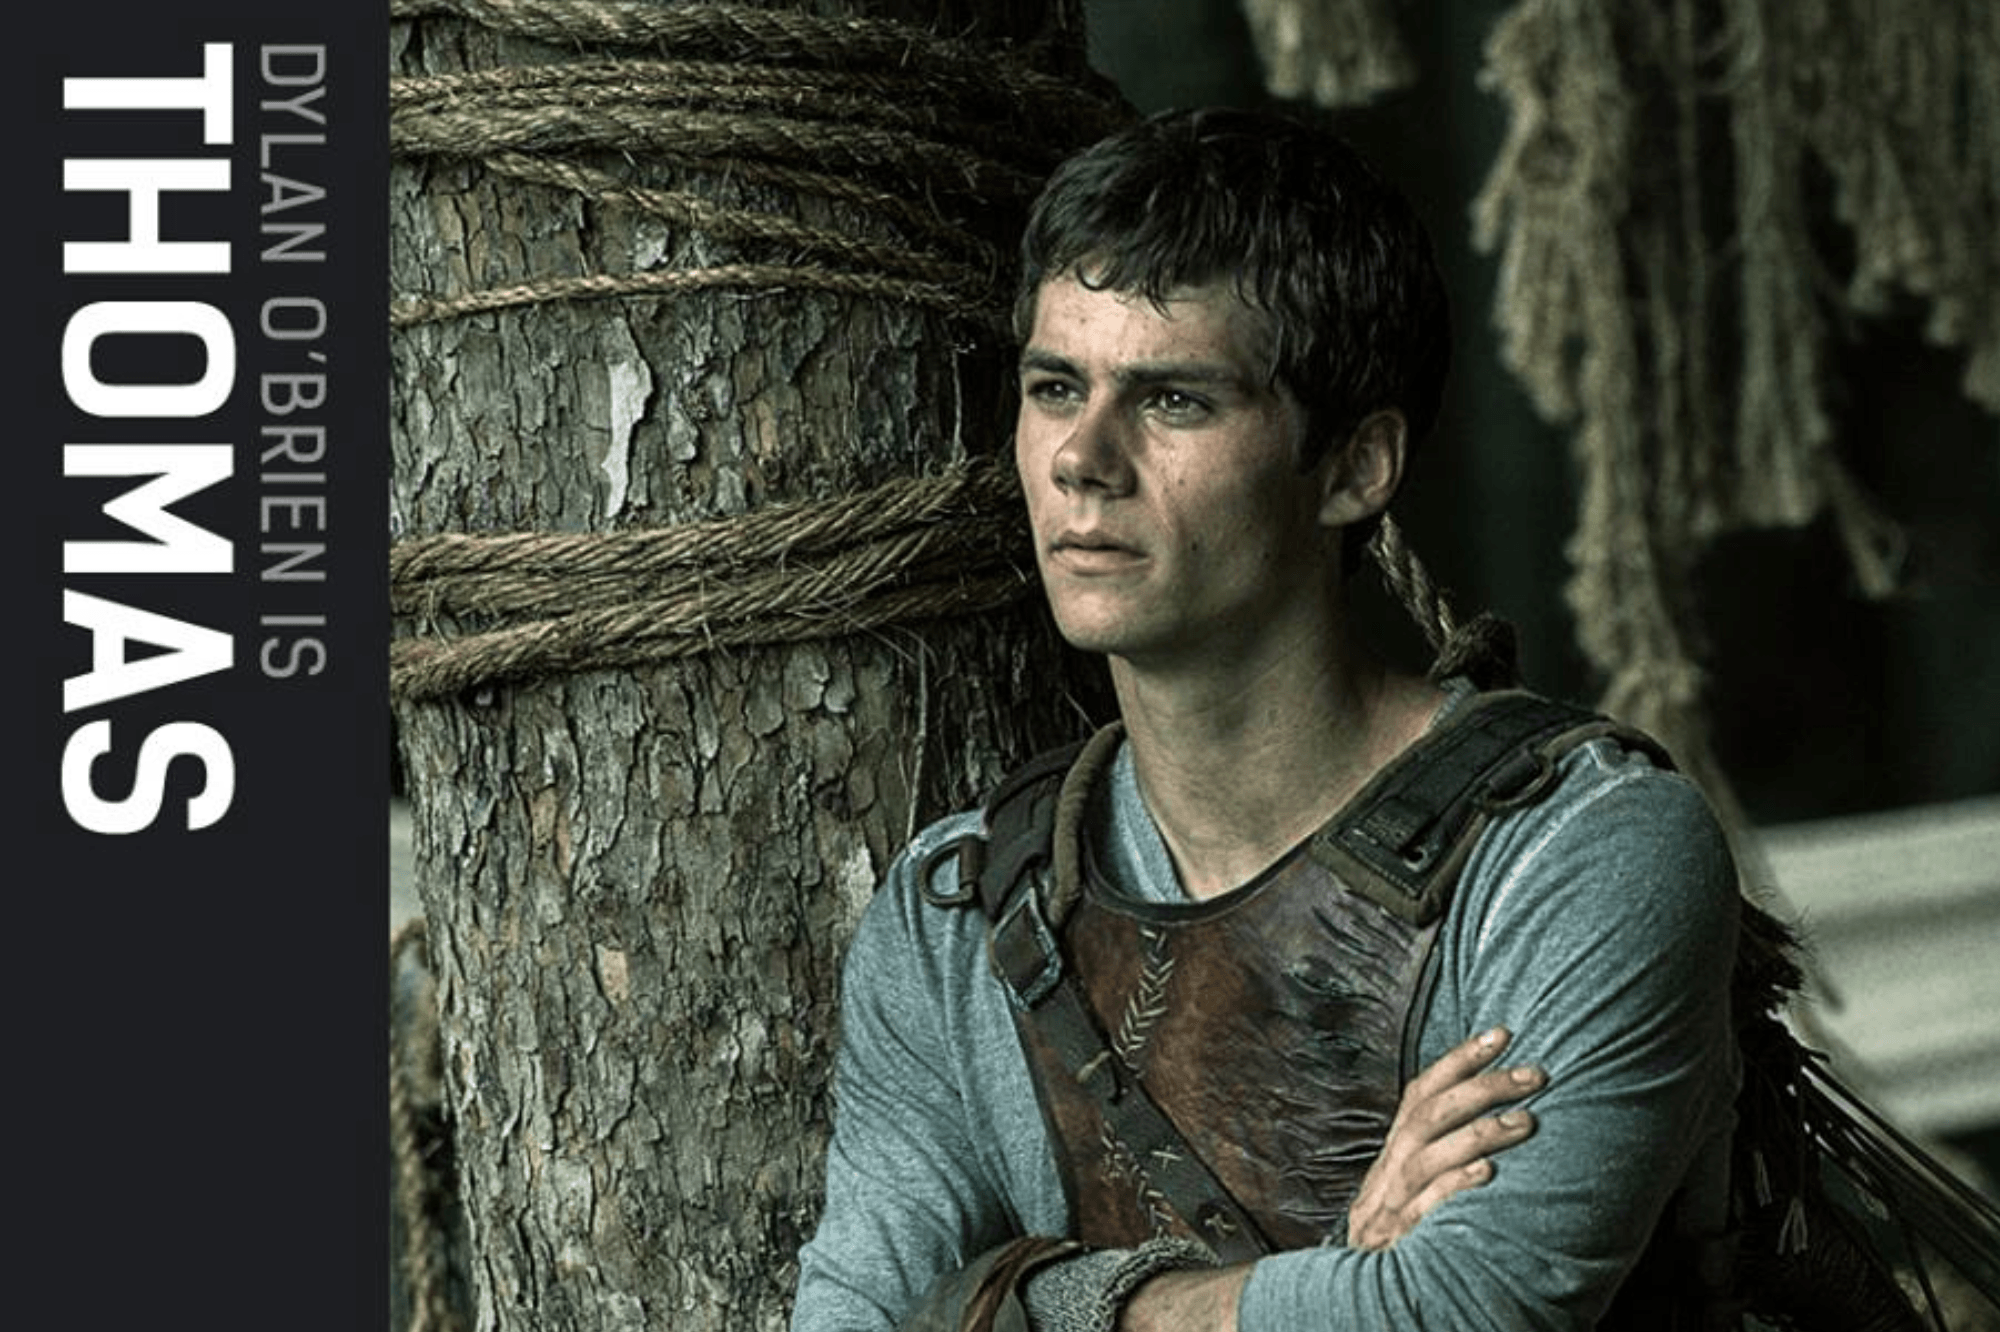 The Maze Runner participant of the game wallpaper and image